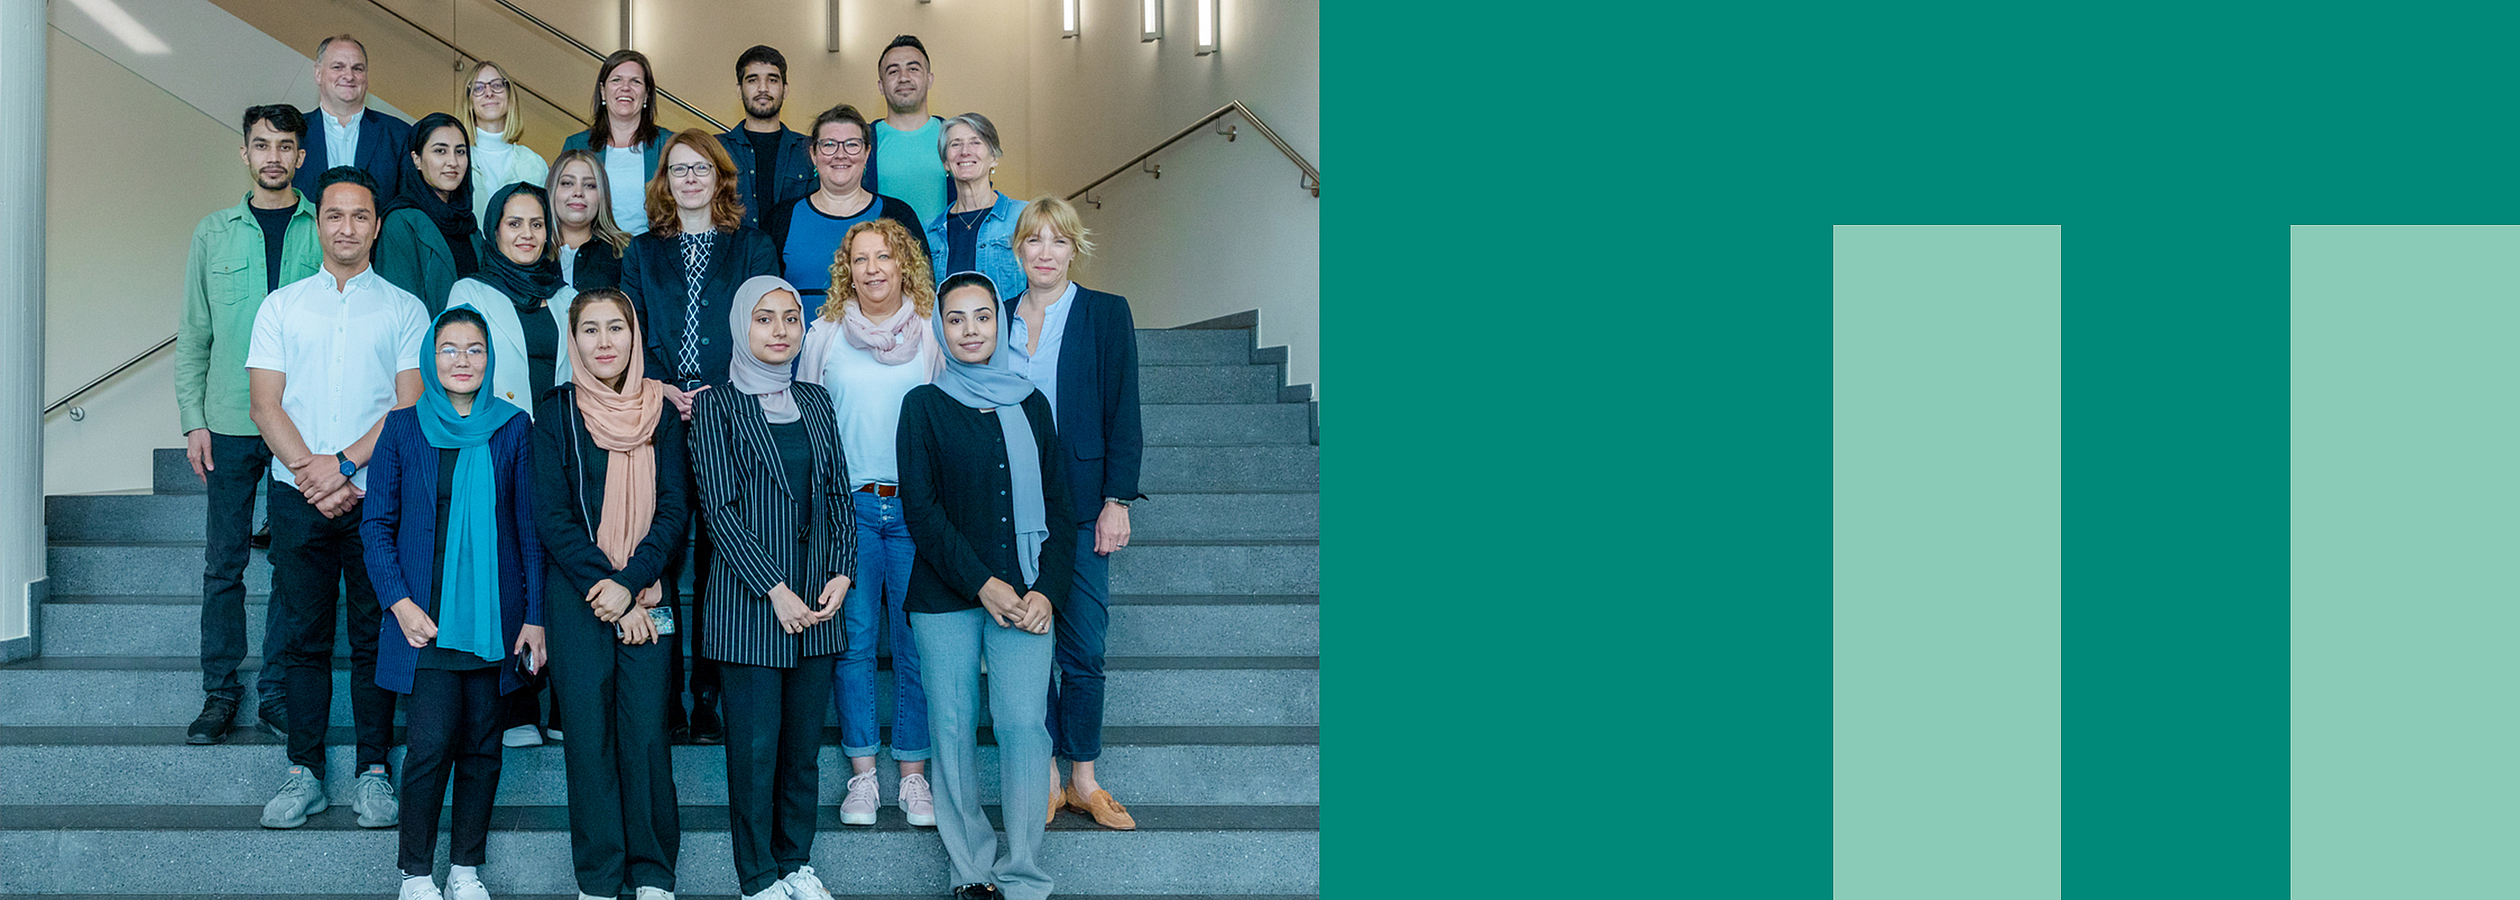 The scholarship holders with Dr. Mandy Boehnke, Vice President for International Affairs, Academic Qualification, and Diversity at the University of Bremen (2nd row, 3rd from left), Dr. Christina von Behr, head of the HERE AHEAD Academy (4th row, 3rd from left), Dr. Marejke Baethge-Assenkamp, head of the International Office at the University of Bremen (4th row, 2nd from left), Dr. Heike Tauerschmidt, head of the International Office of the City University of Applied Sciences (3rd row, right), Christoph Haasler, deputy managing director of the Bremen Student Services Organisation (4th row, left), as well as other staff members of the HERE AHEAD Academy.